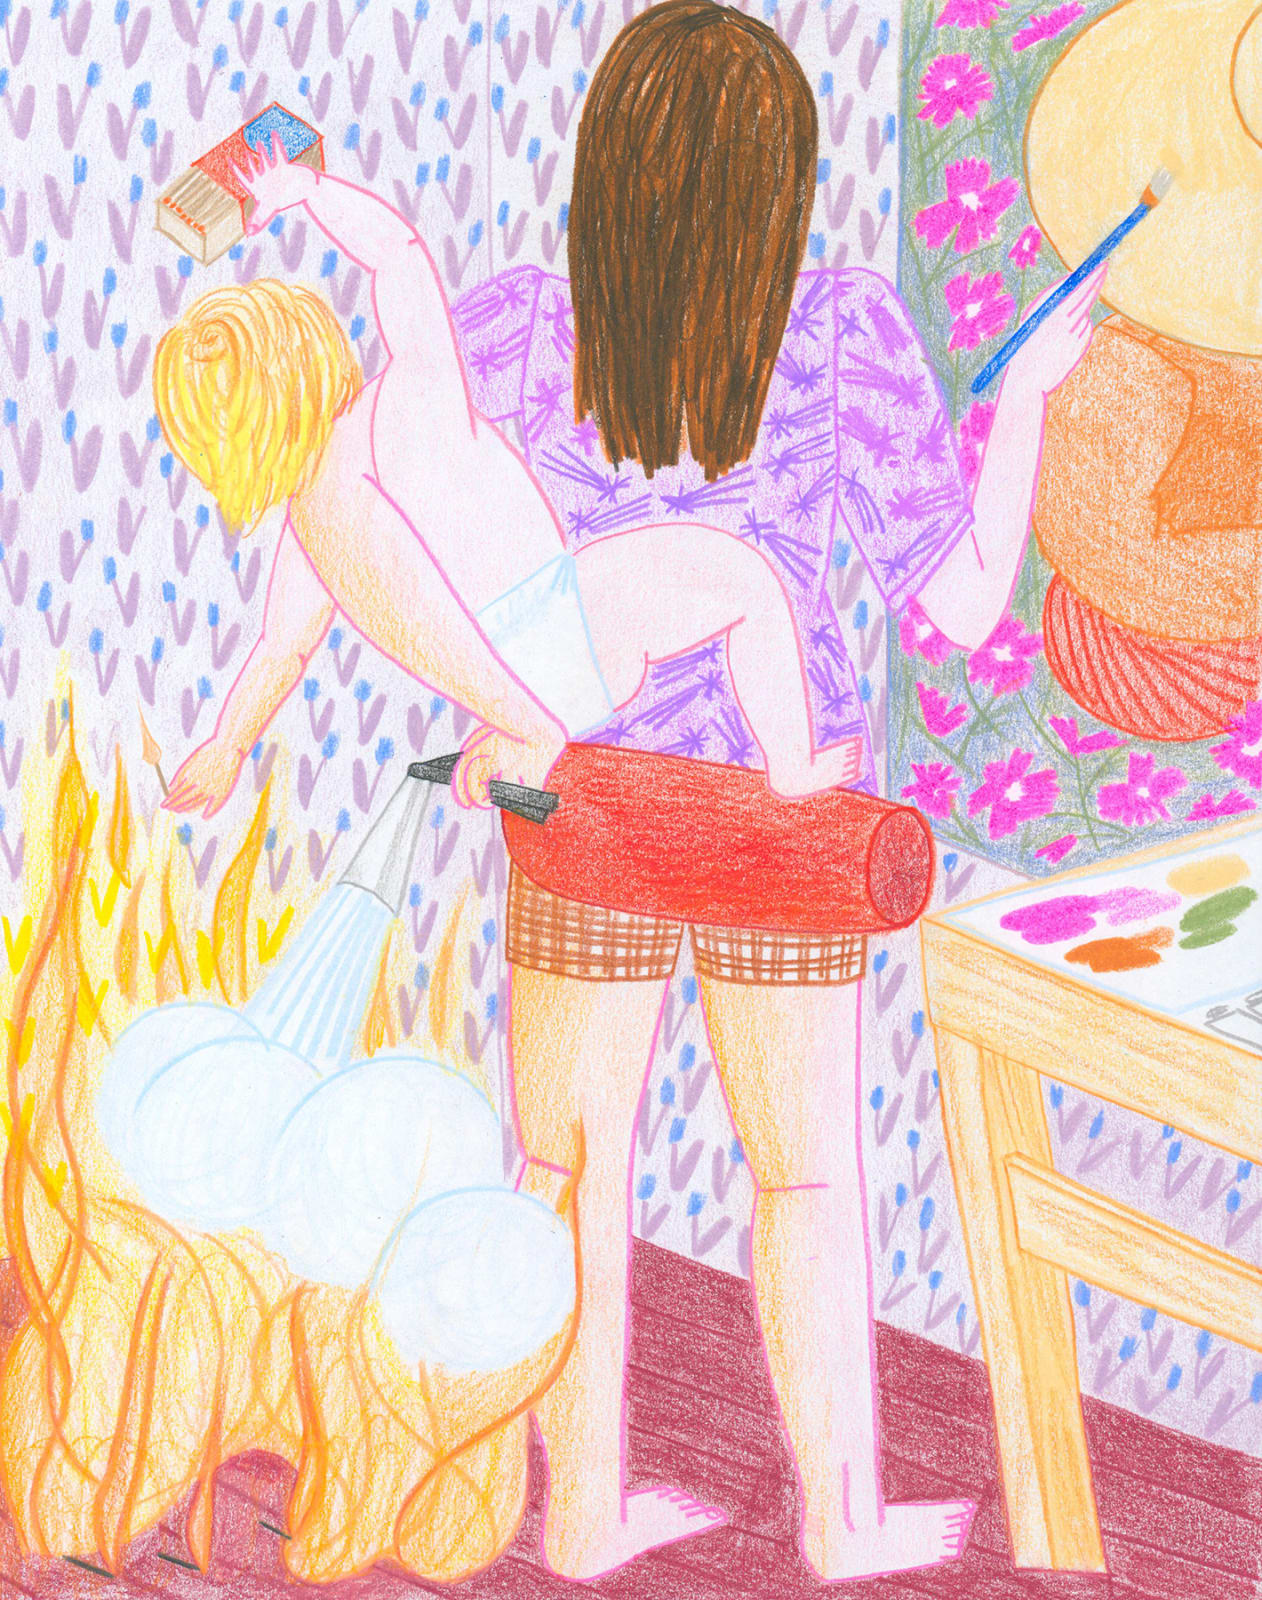 Drawing of the artist painting a picture while she simultaneously holds her child waving matches in the air. The artist uses the hand holding the child to extinguish a fire in the room as she paints. 